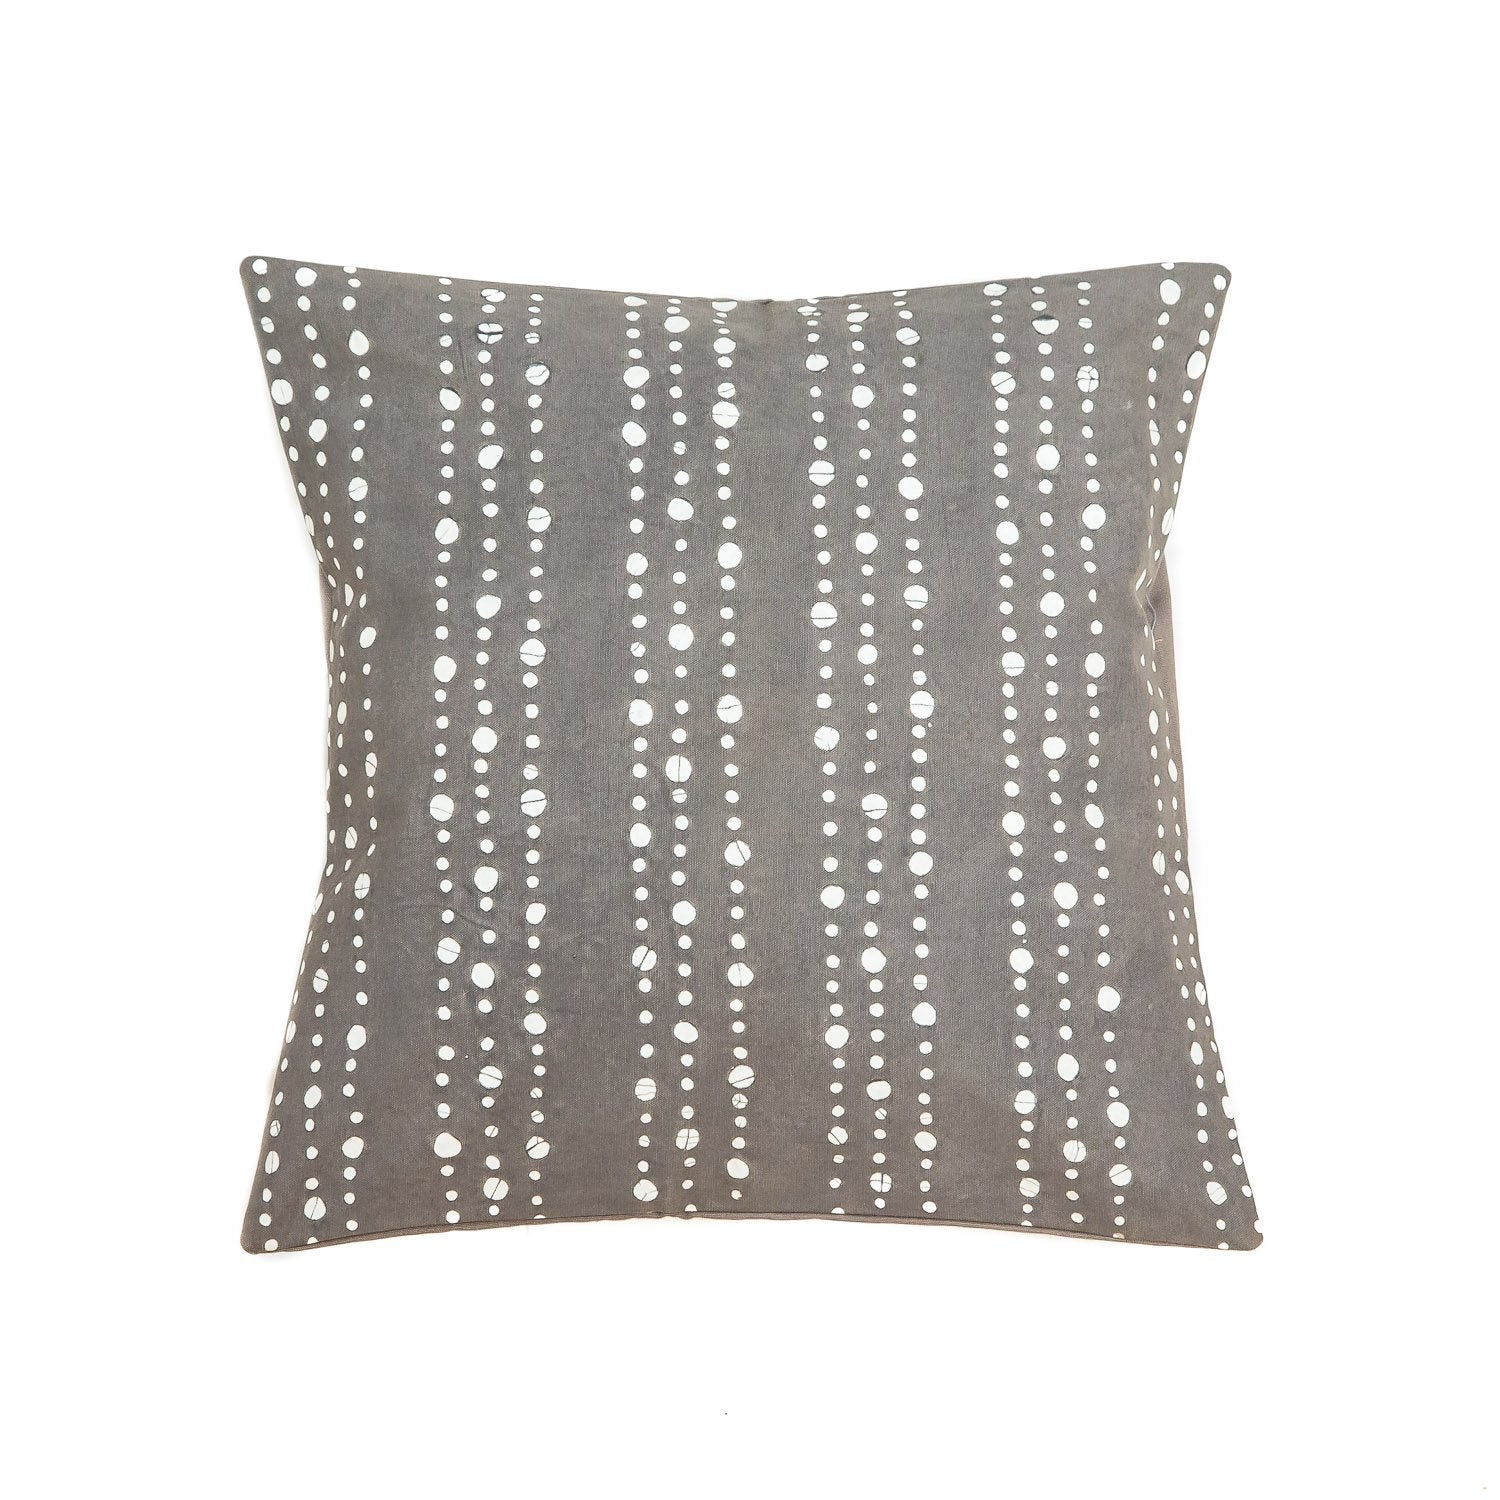 Tribal Cloth grey Graduated Dots Cushion Cover, Hand Painted by TRIBAL TEXTILES, Handcrafted Home Decor Interiors